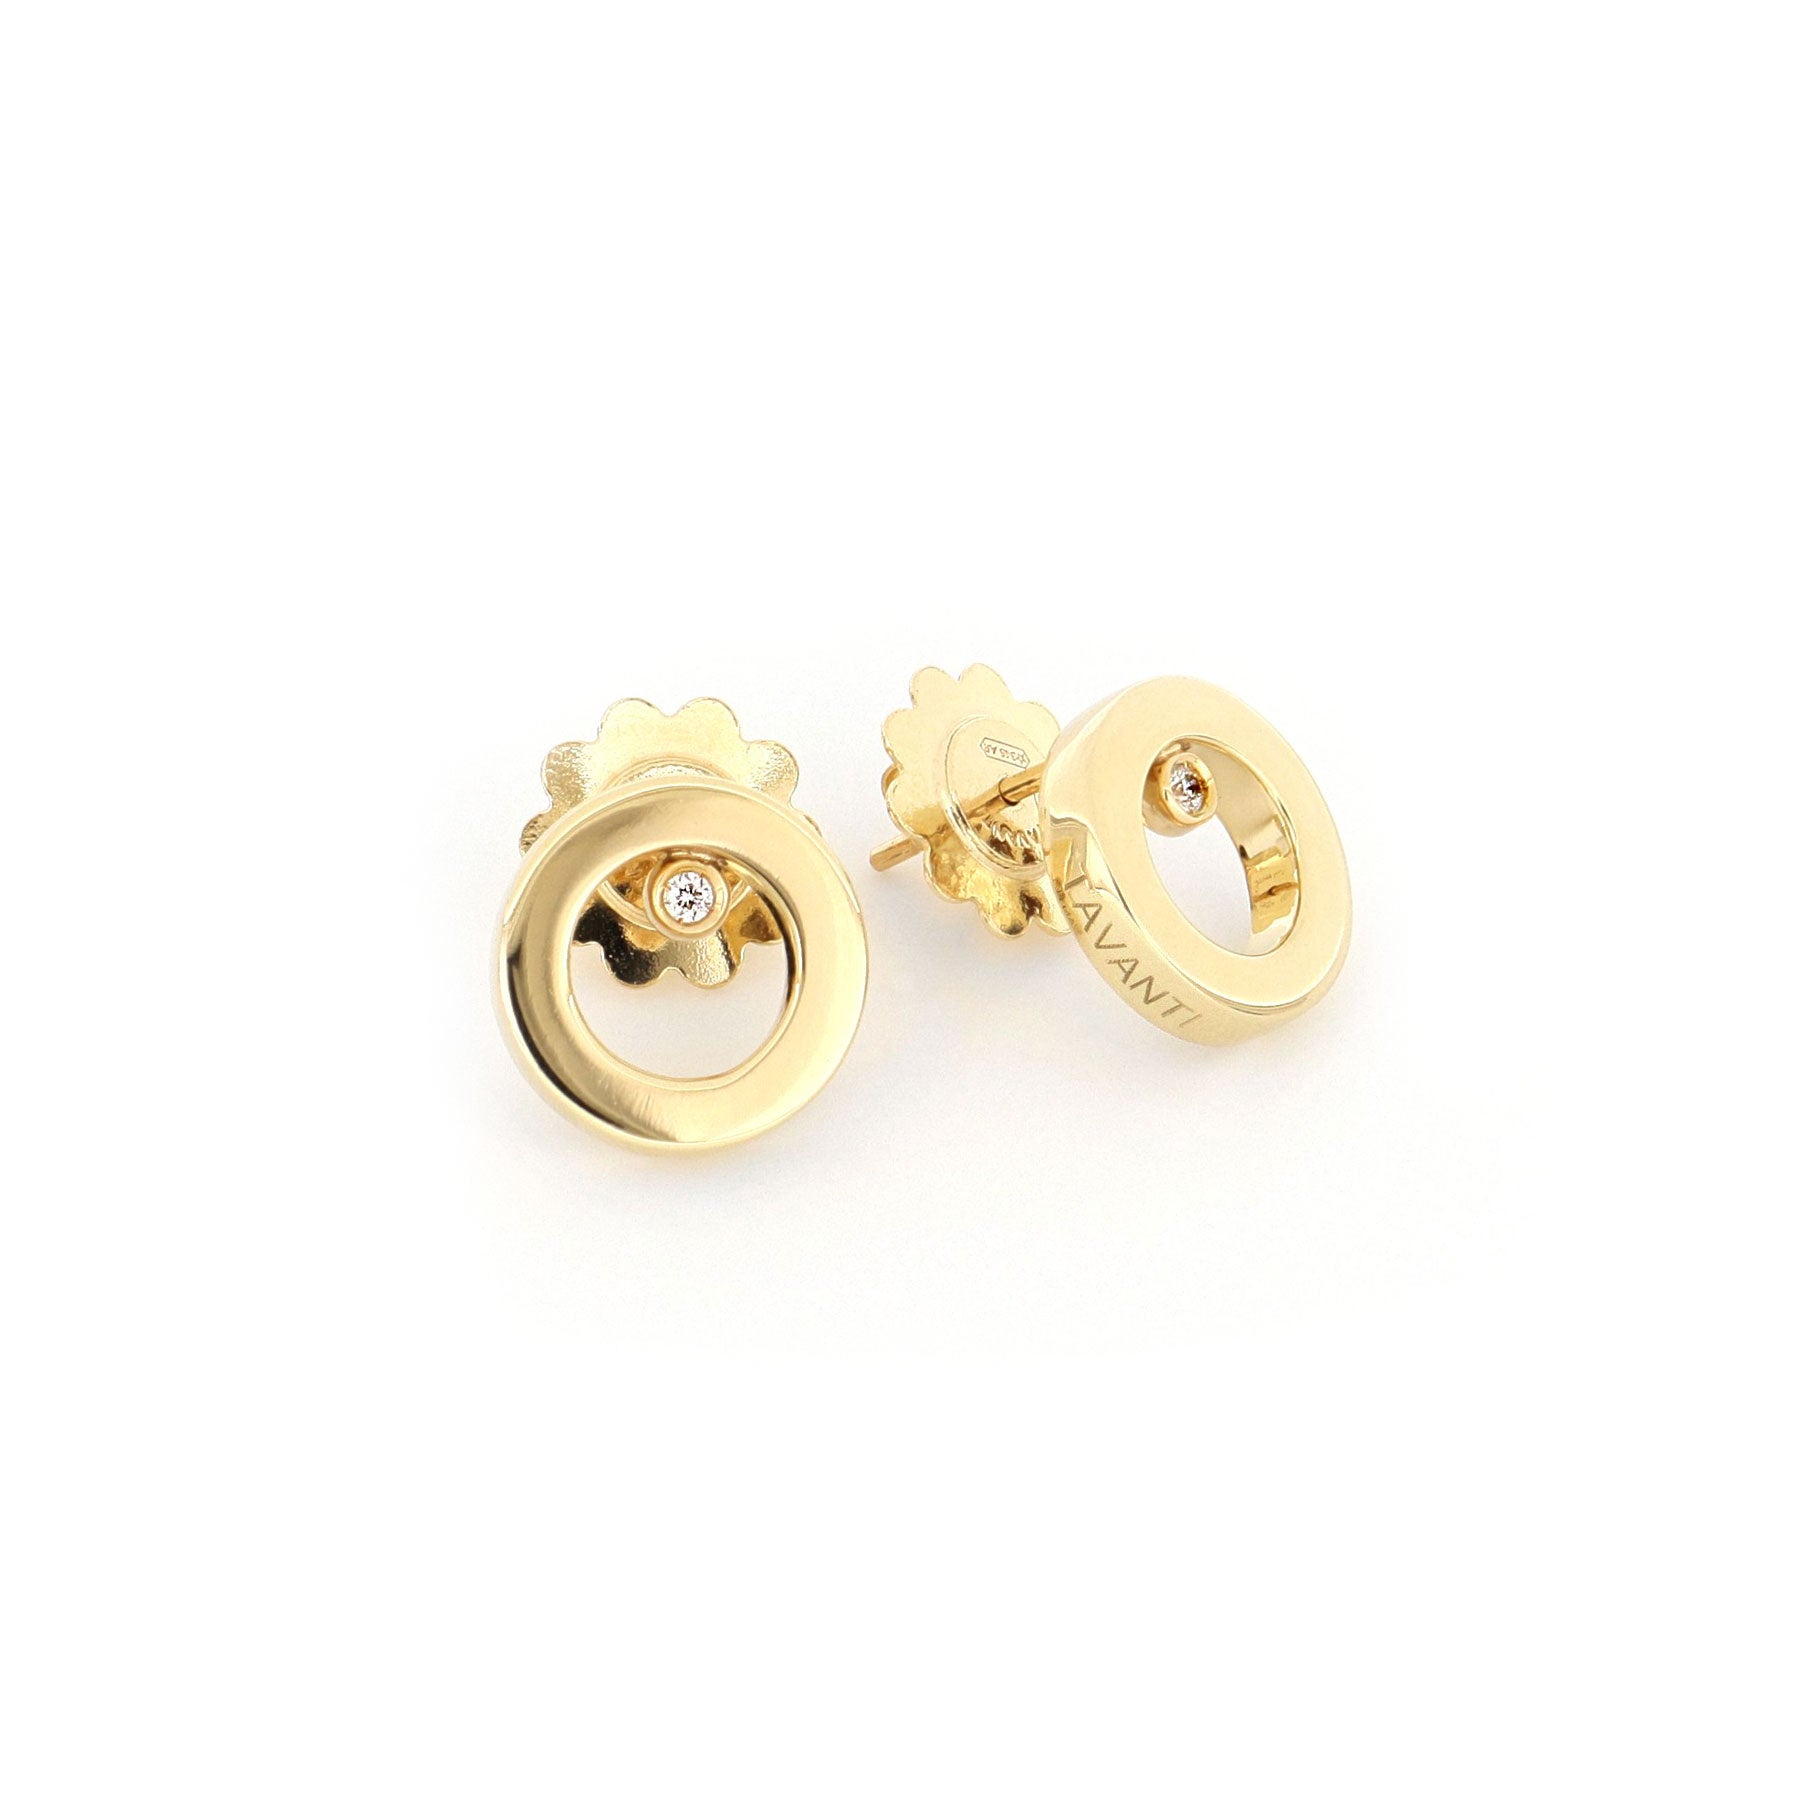 Video Essenza Earrings Polished Gold And Diamonds